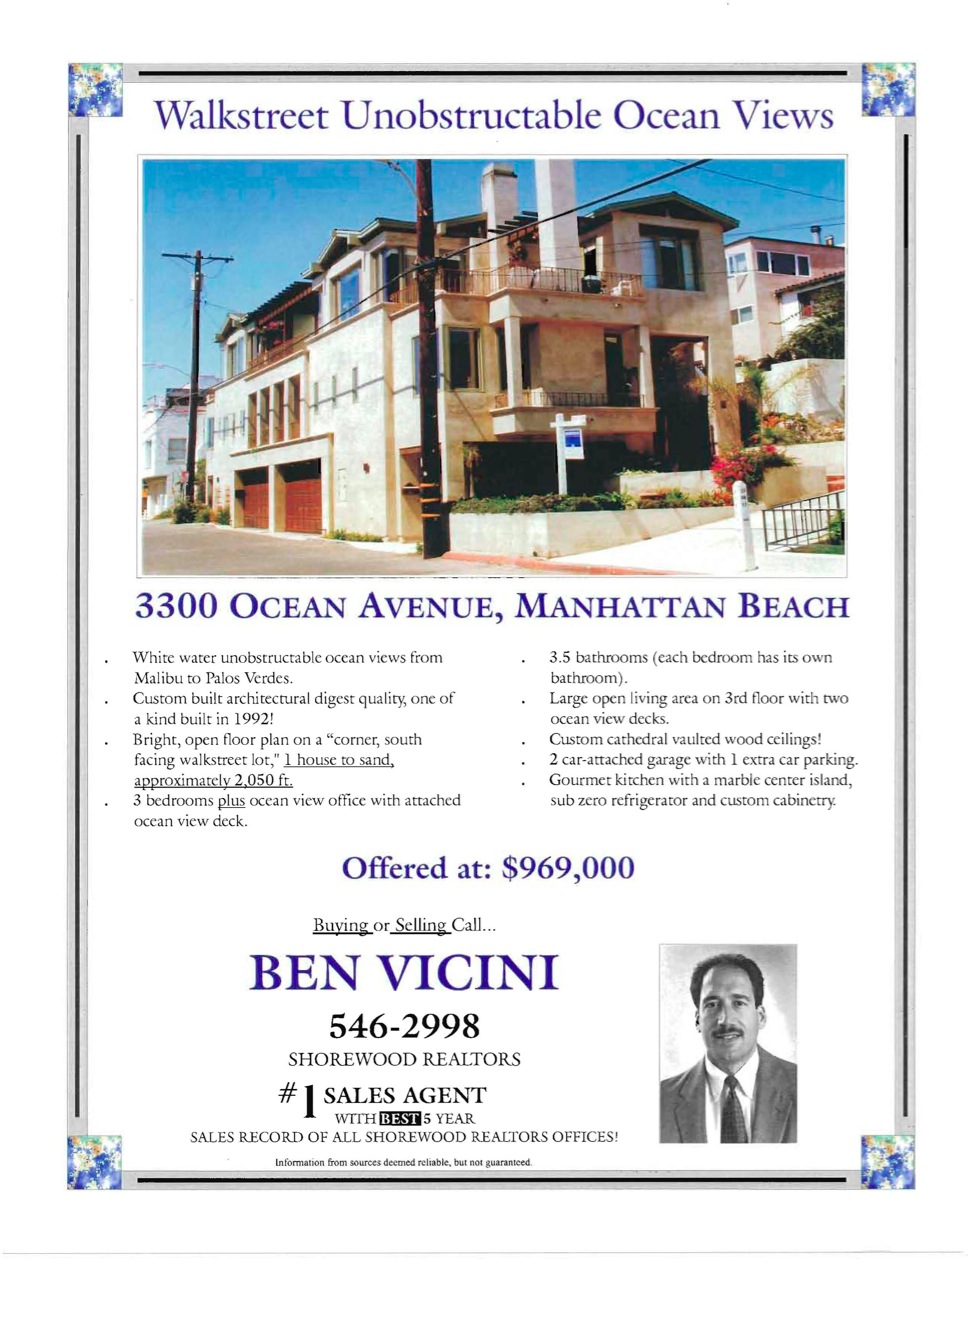 Vicini's Past Listings & Sales_Page_69